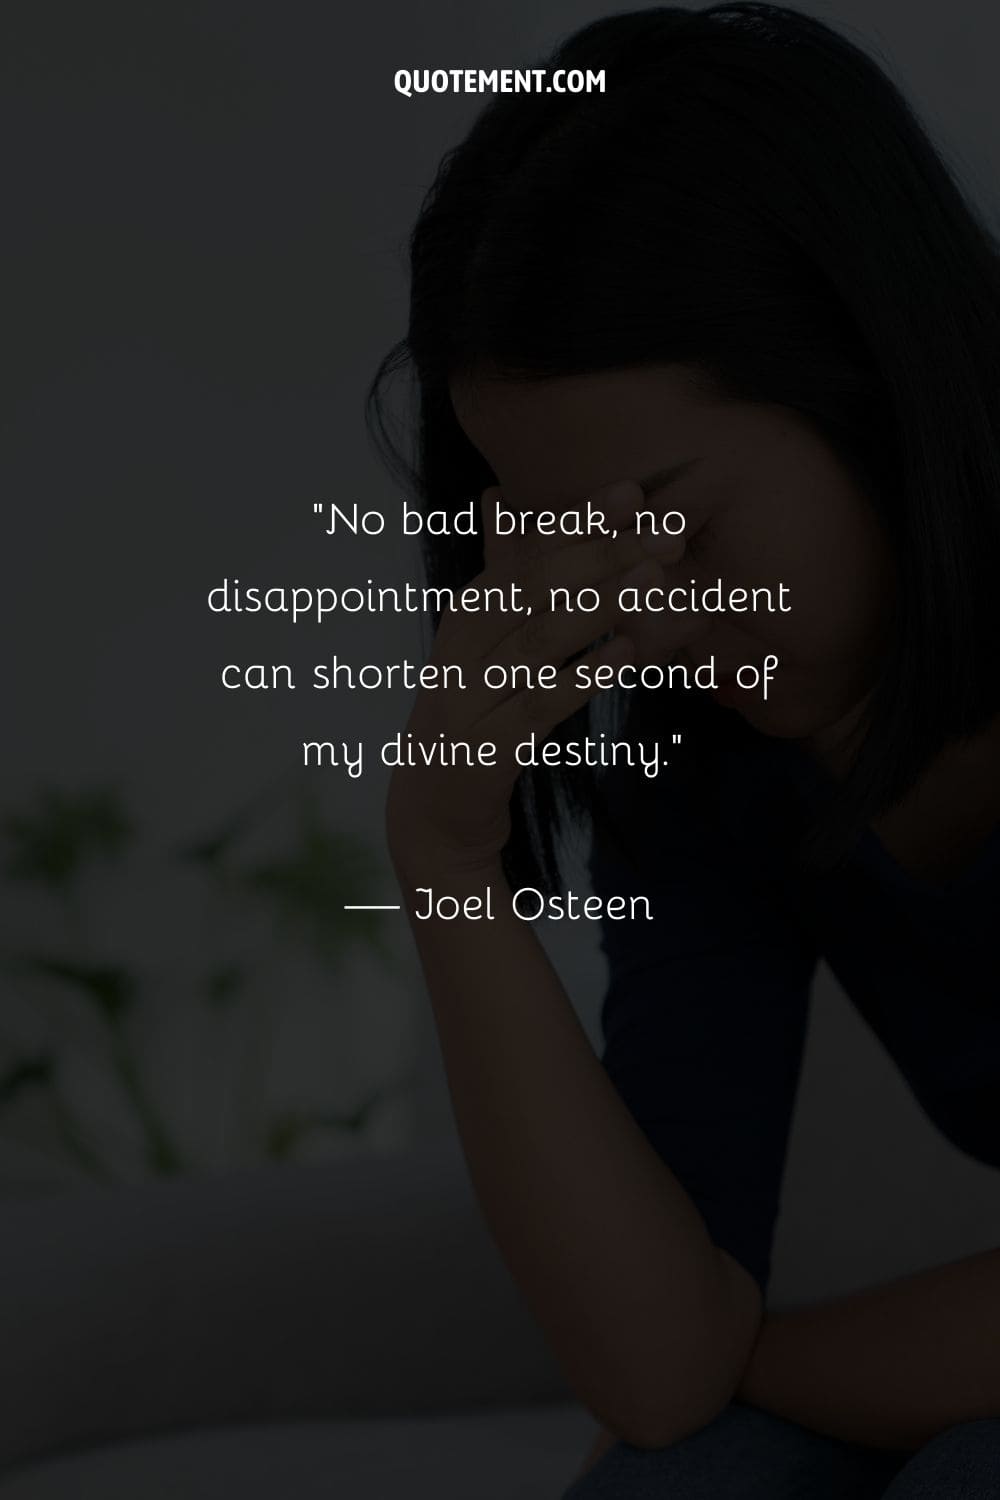 No bad break, no disappointment, no accident can shorten one second of my divine destiny